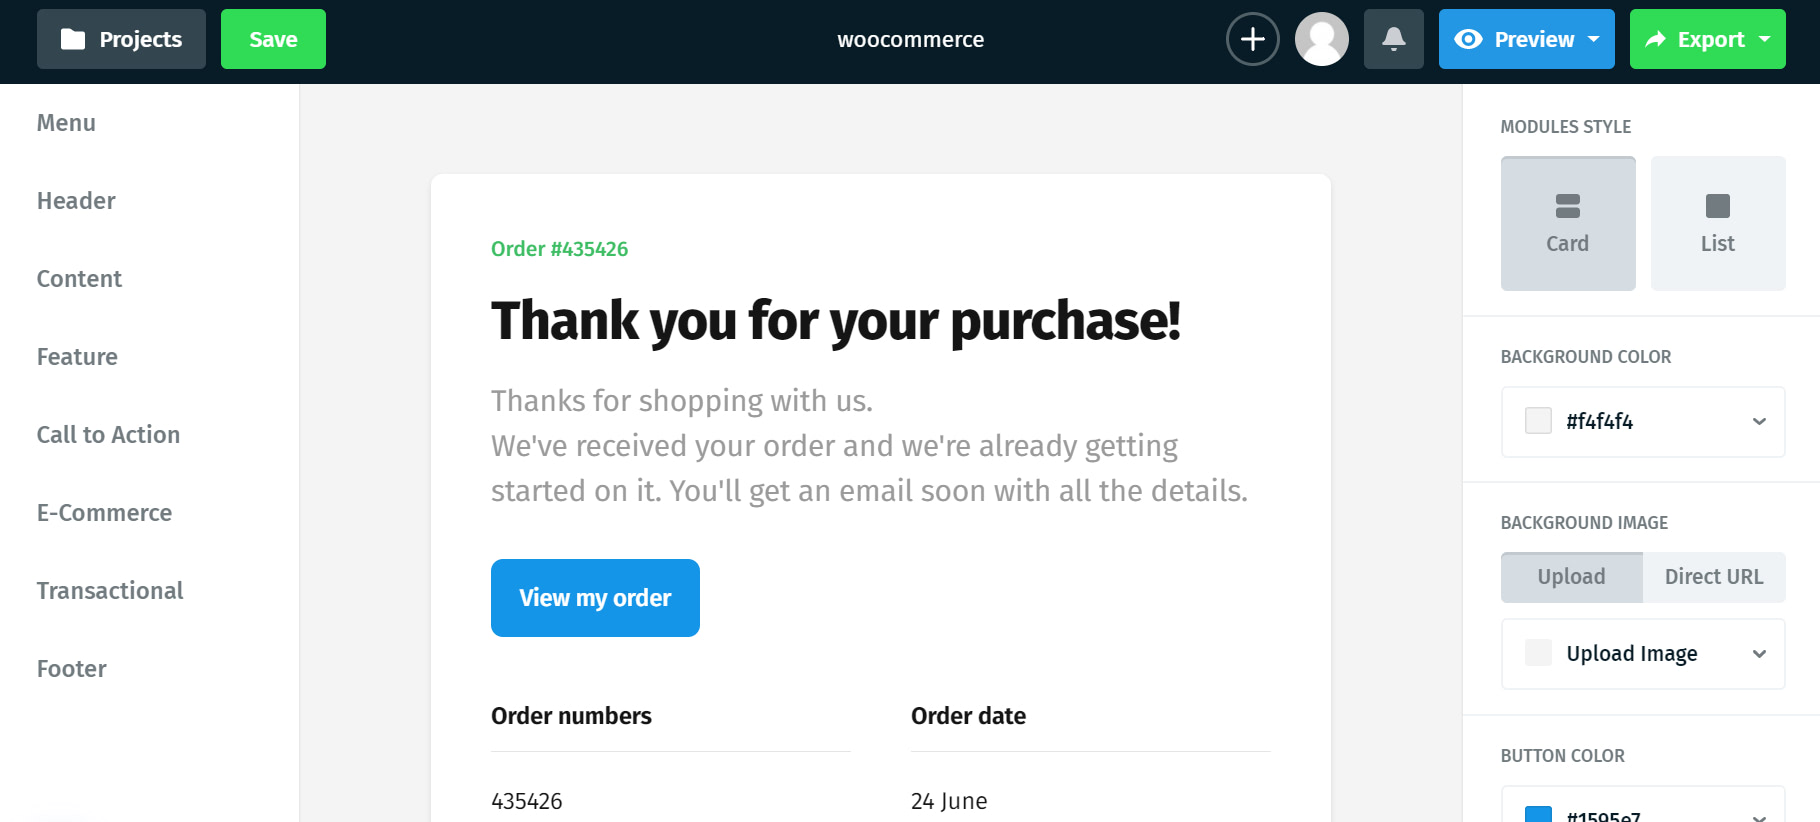 How to Customize WooCommerce Email Templates